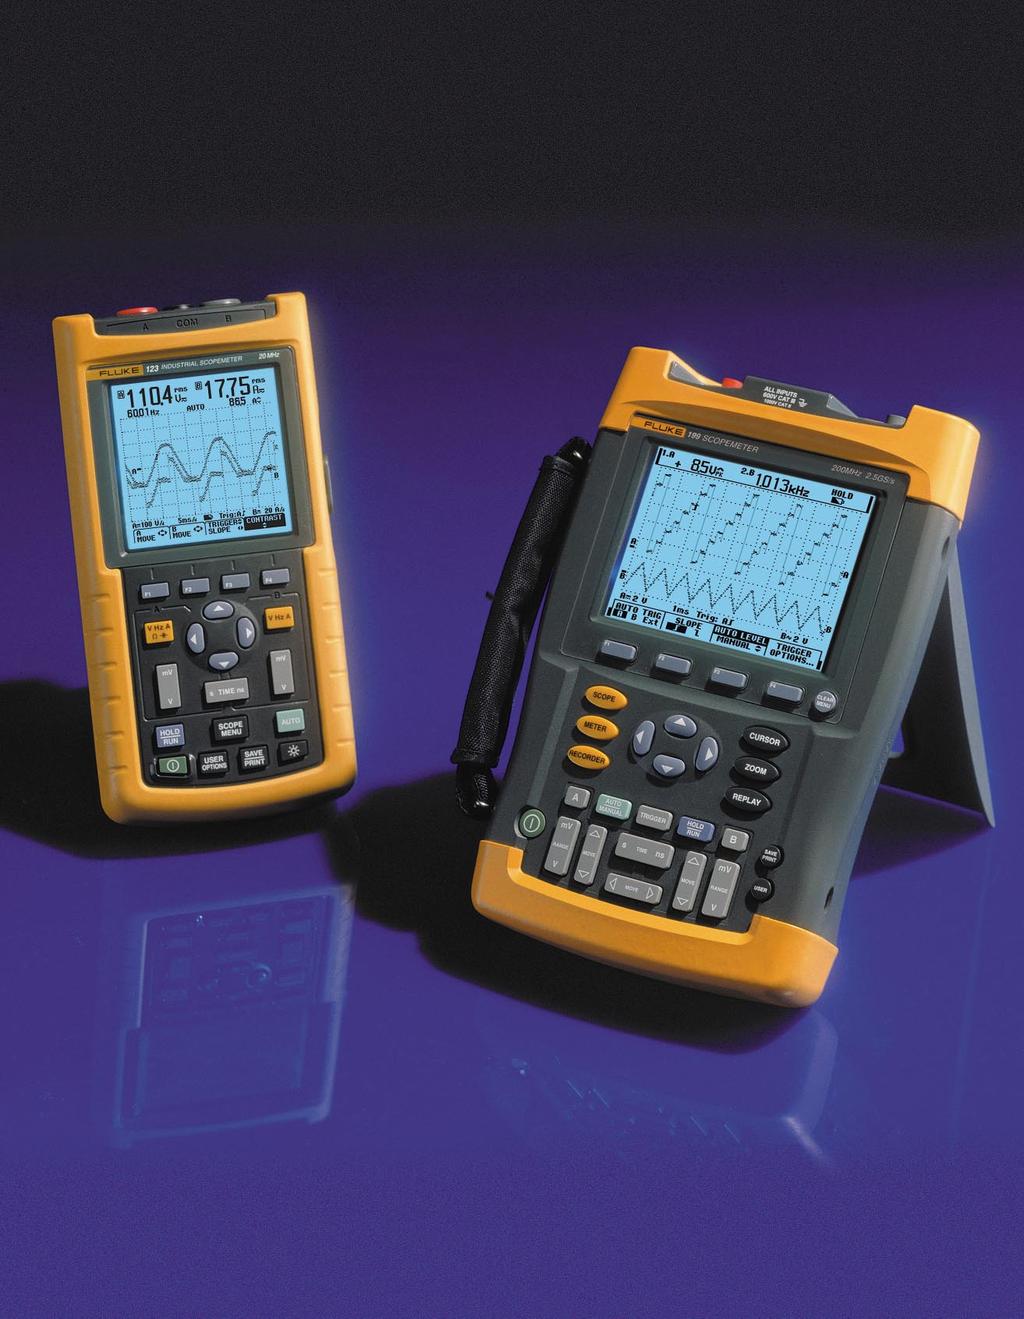 Oscilloscopes for field applications ScopeMeter 123 and 190 Series 20 MHz to 200 MHz bandwidth Up to 2.